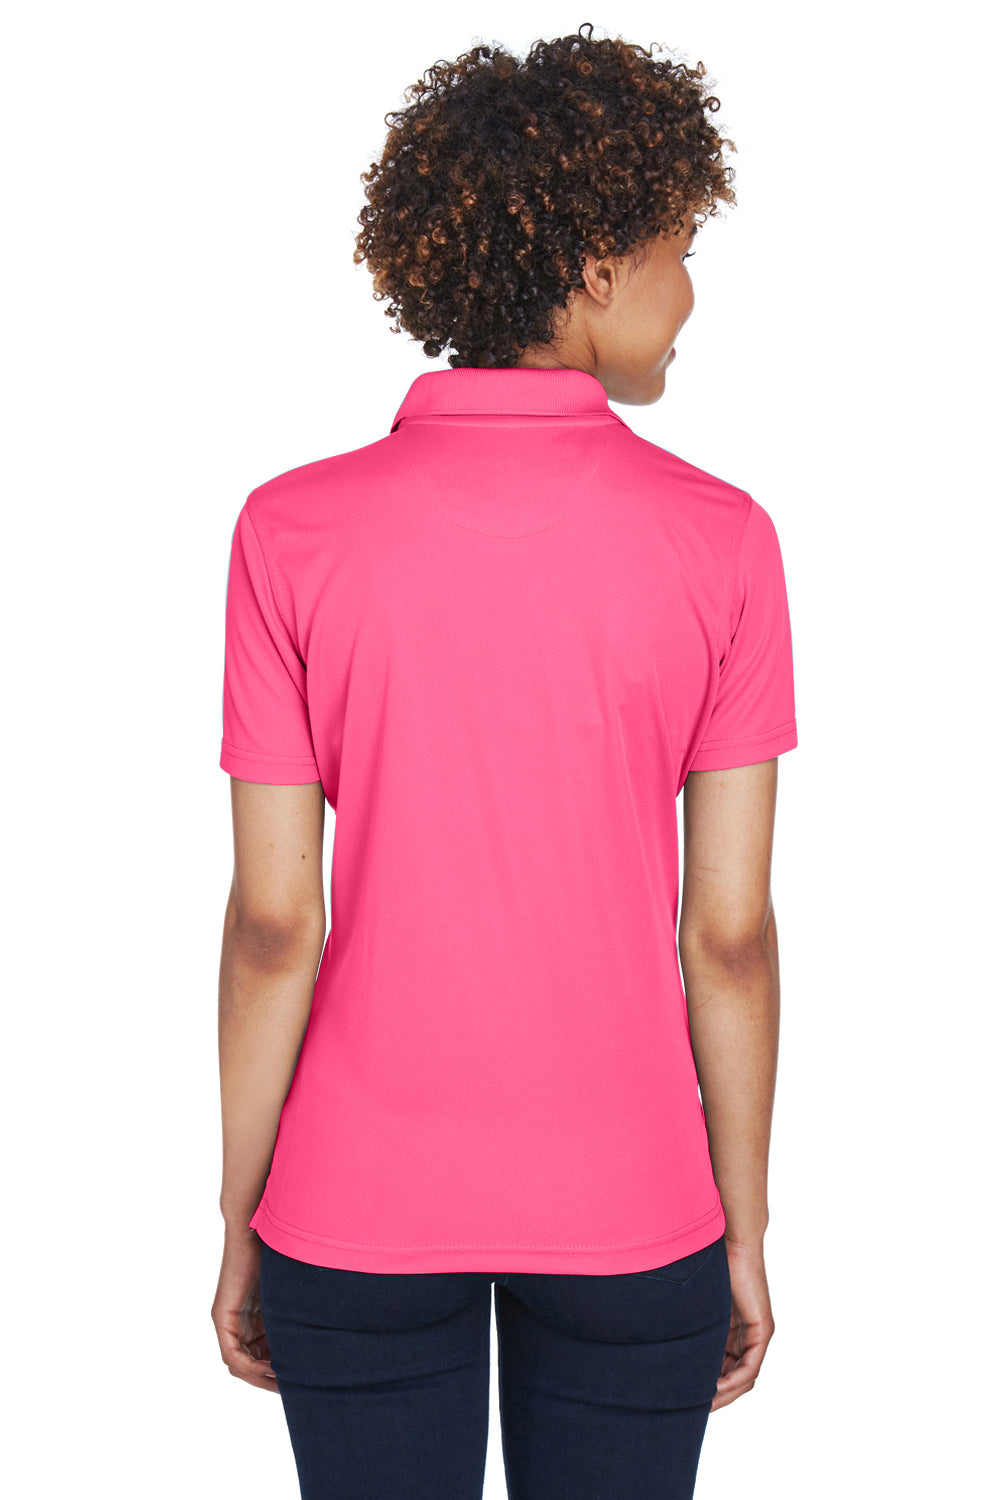 UltraClub 8210L Womens Cool & Dry Moisture Wicking Short Sleeve Polo Shirt Heliconia Pink Back